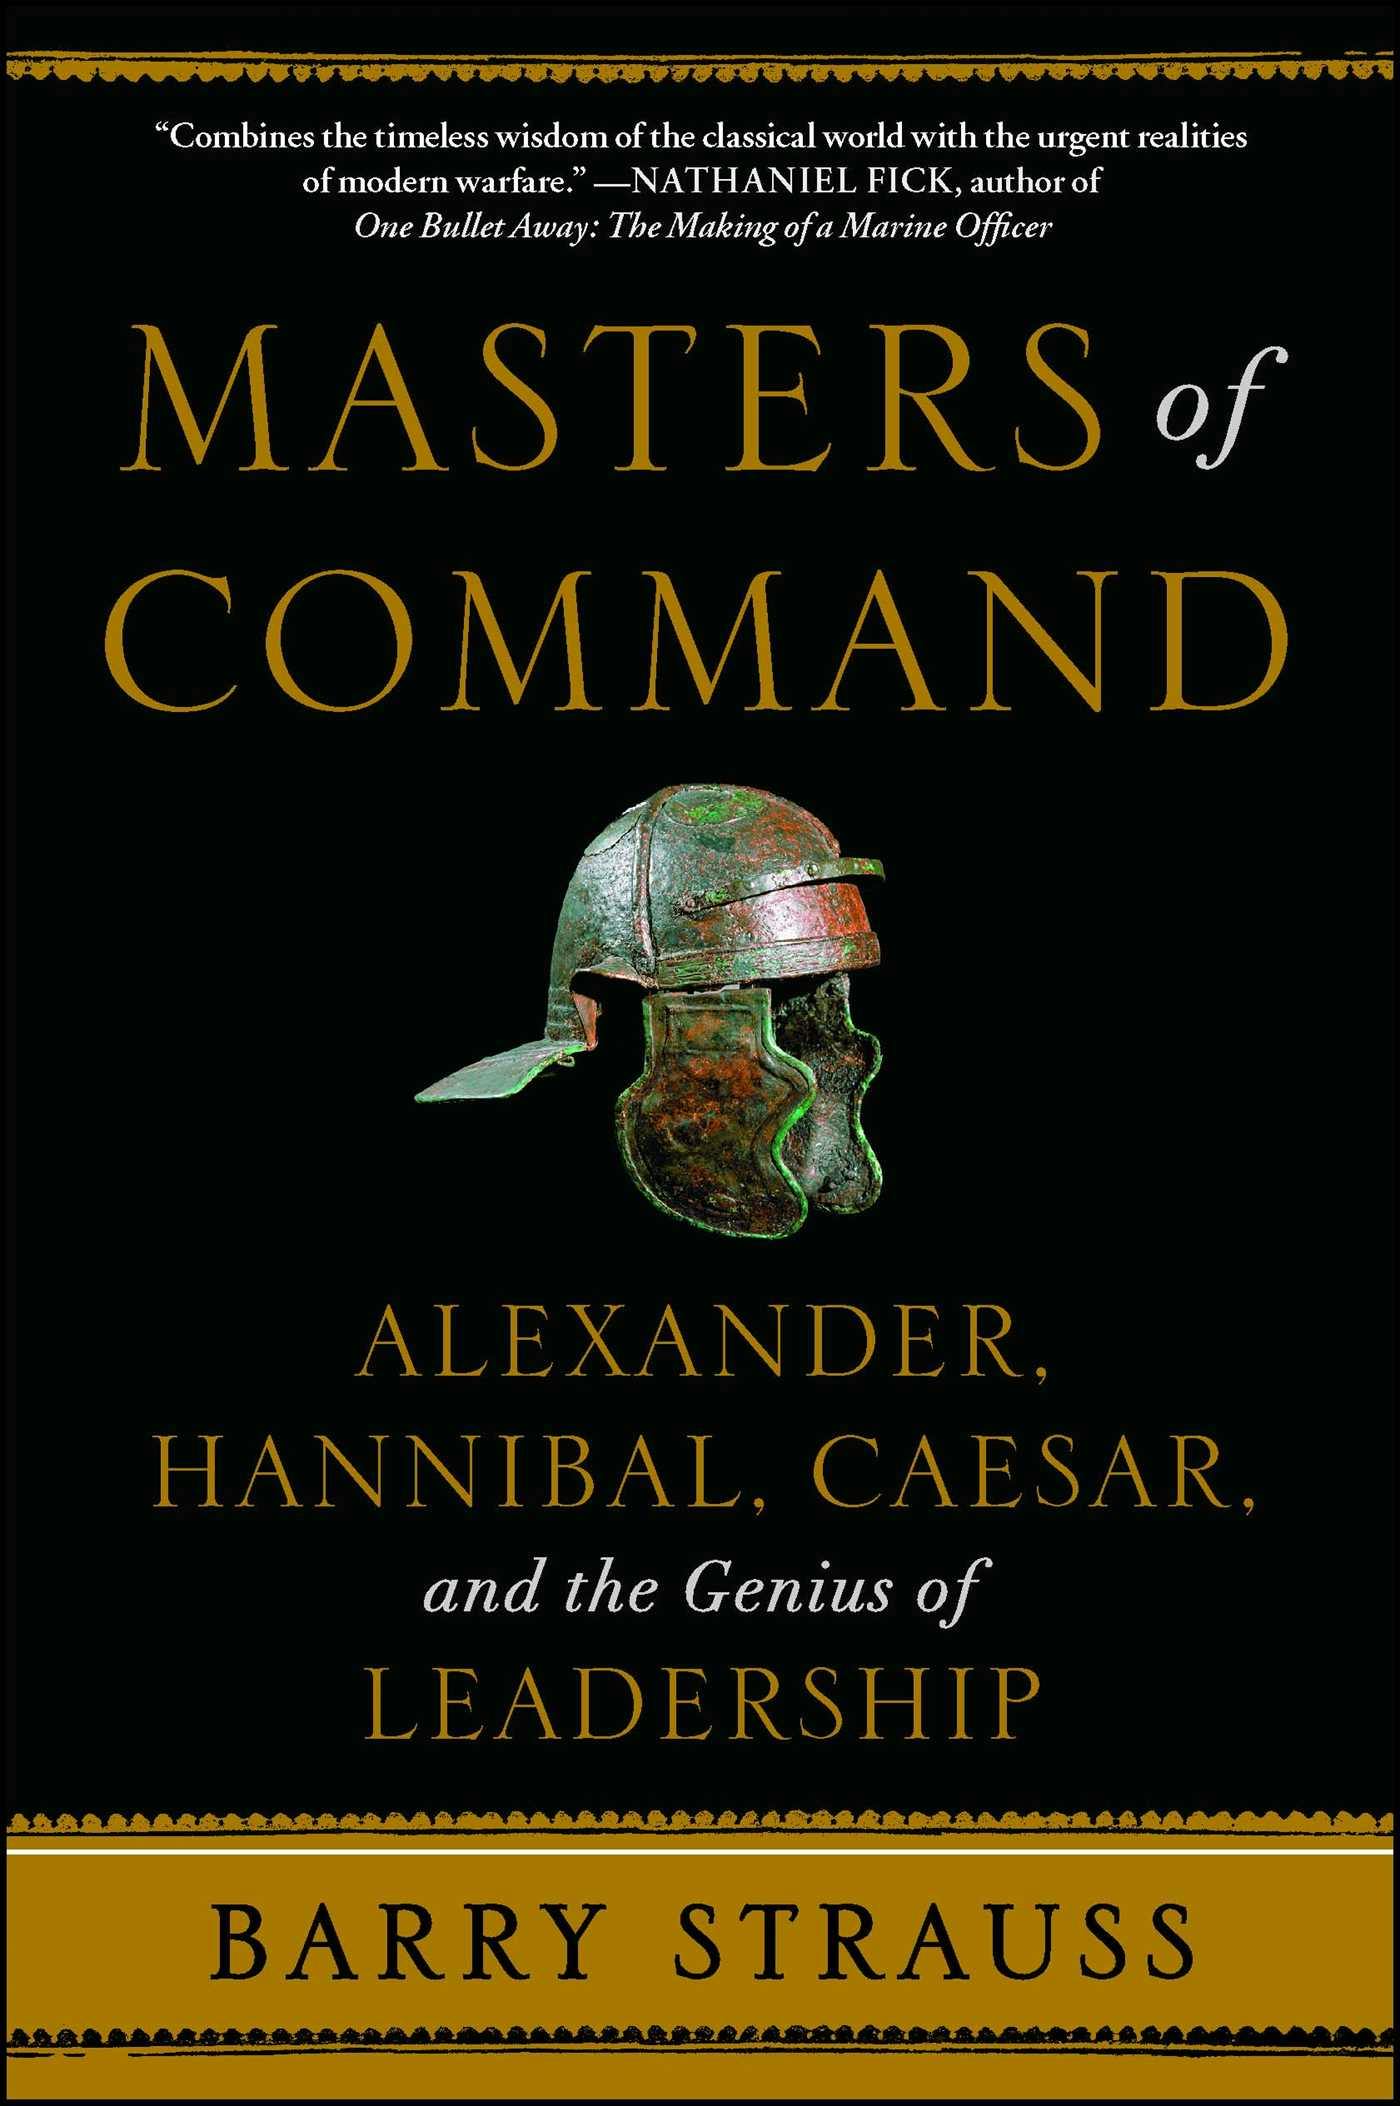 Masters of Command: Alexander, Hannibal, Caesar, and the Genius of Leadership - Barry Strauss